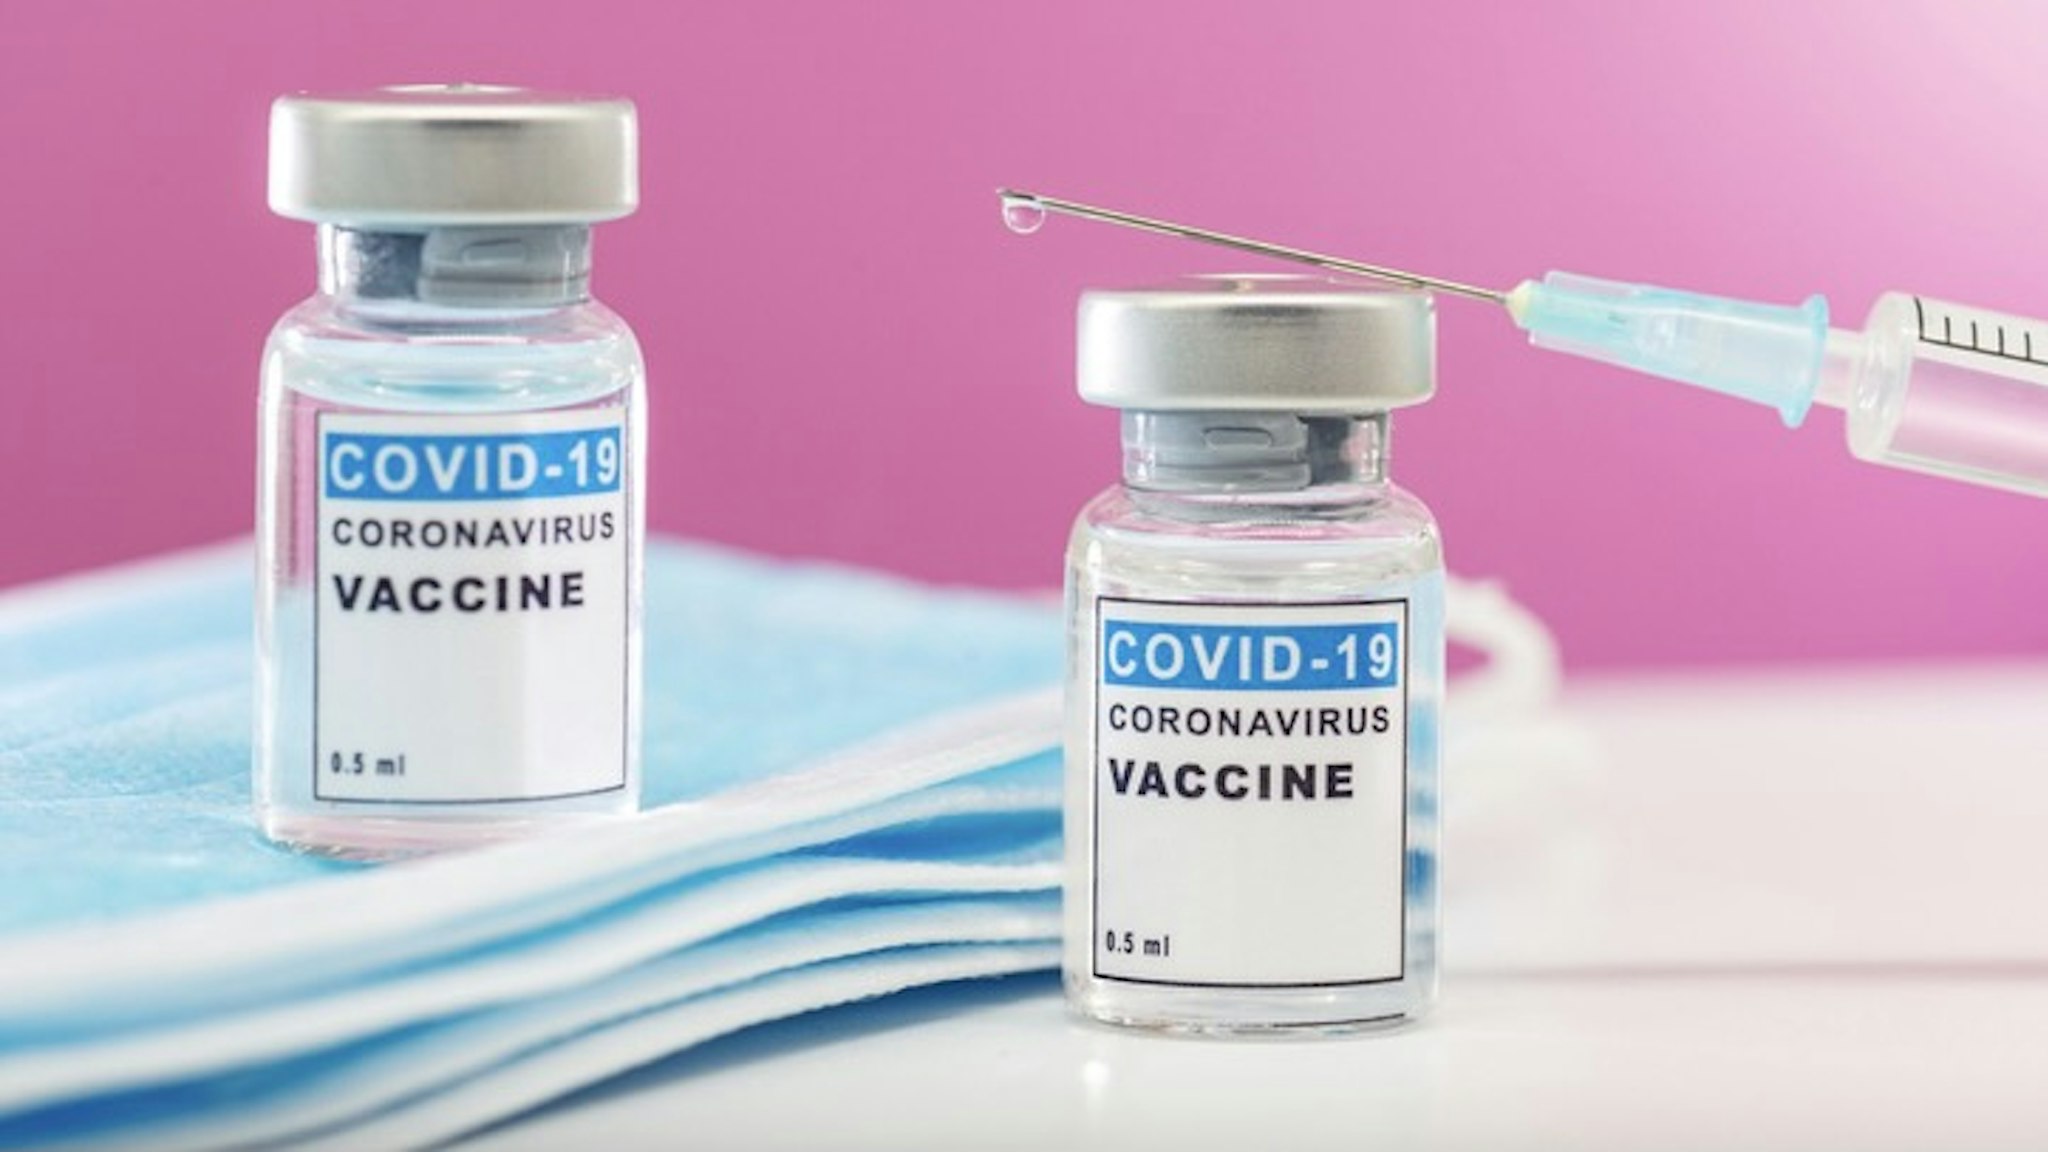 Vaccination concept. Close-up medical syringe with a vaccine. - stock photo Coronavirus vaccine in syringe. Macro image of needle and vaccine ampoules on pink background Stefan Cristian Cioata via Getty Images